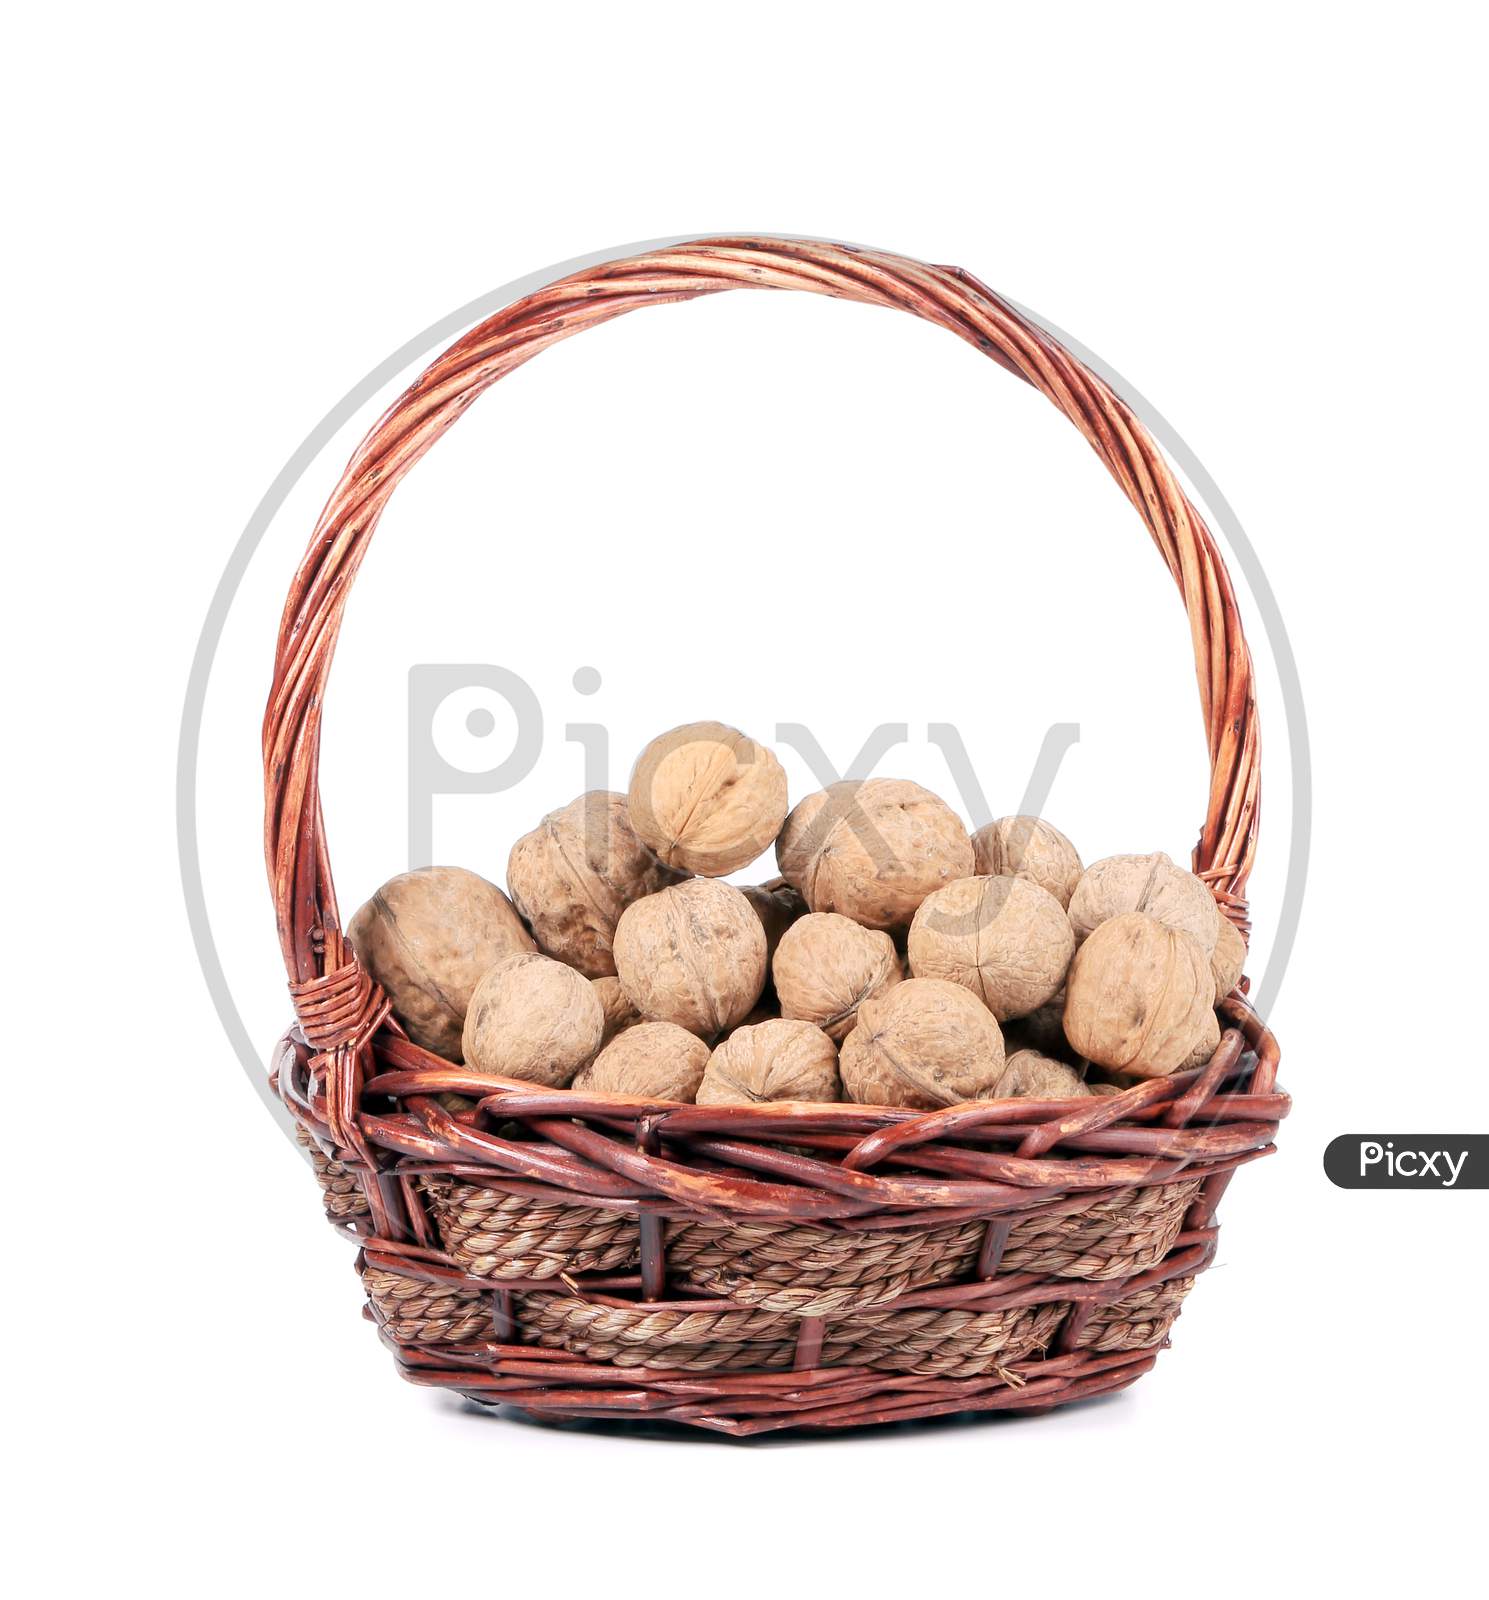 Basket With Walnuts. Isolated On A White Background.